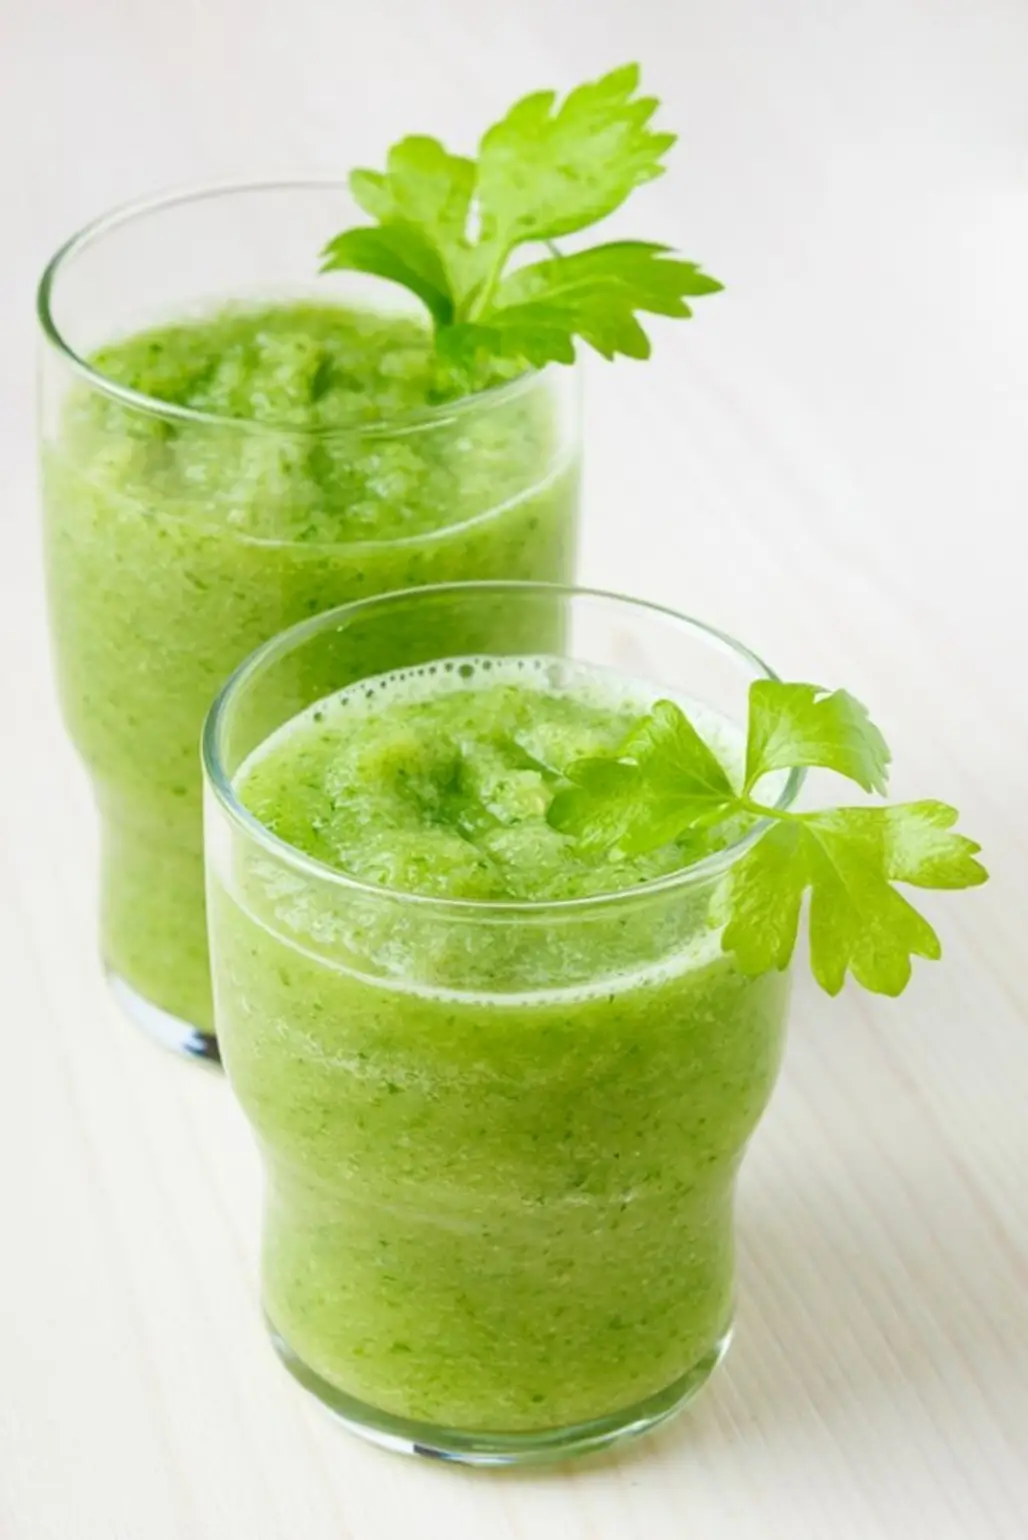 Drink a Green Smoothie for Breakfast